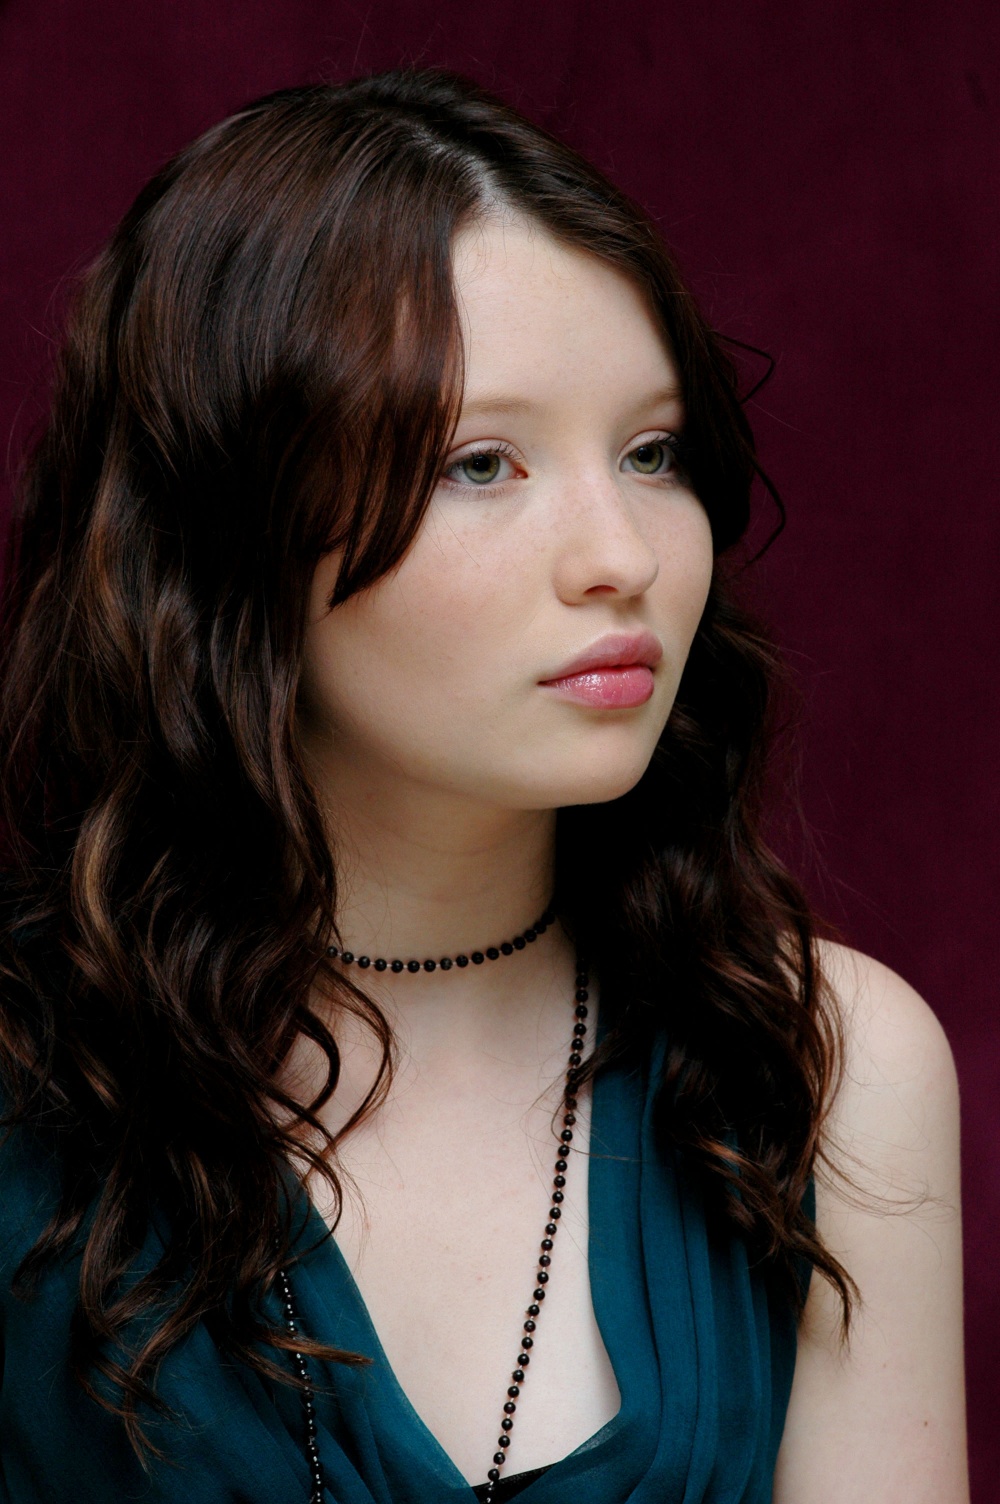 Poze Emily Browning - Actor - Poza 29 din 95 - CineMagia.ro